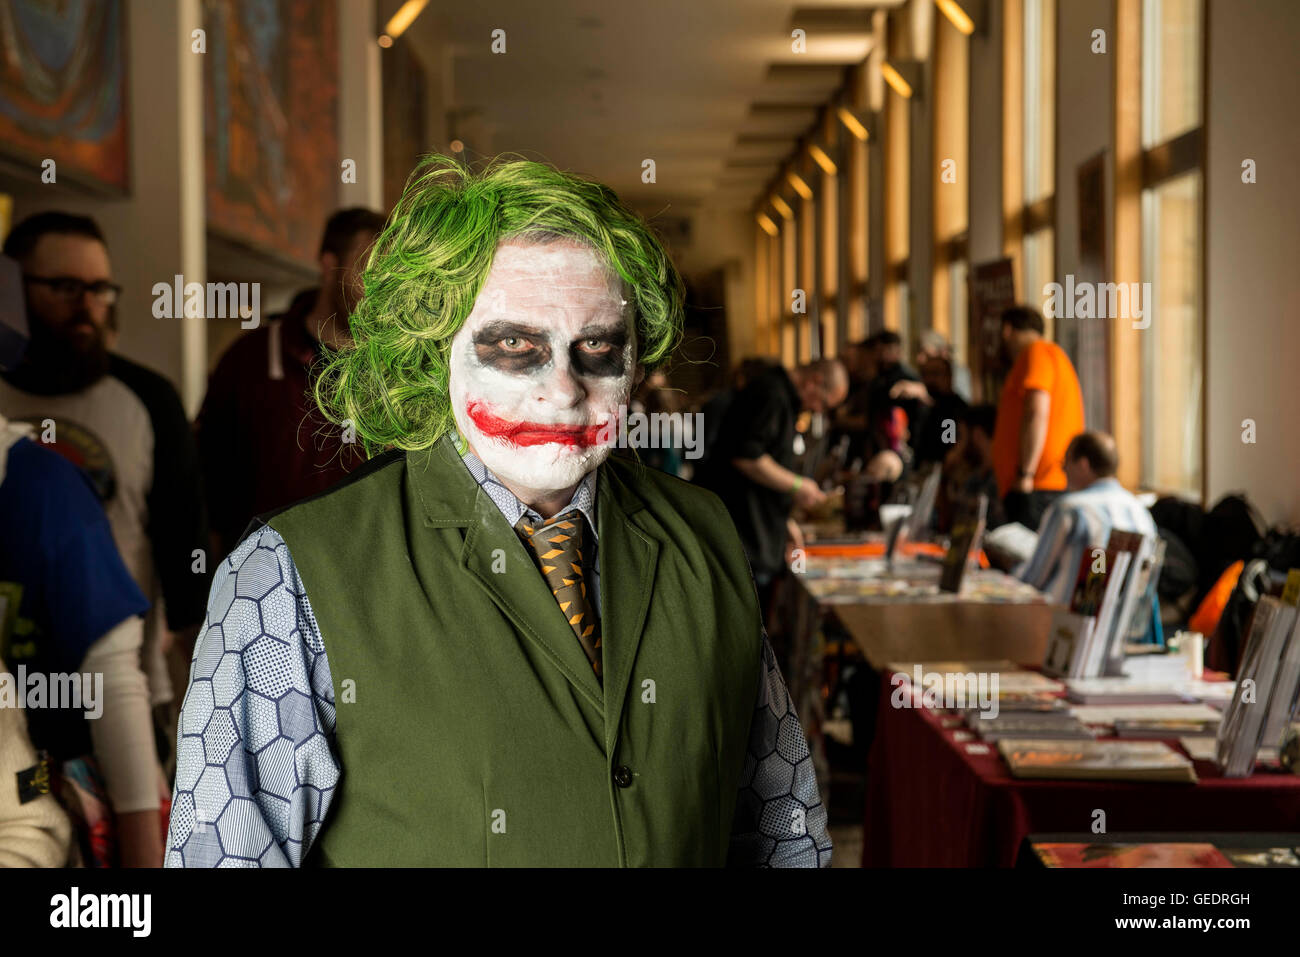 Cosplayer dressed as the Joker poses for photographs at a Comic Con convention. Stock Photo